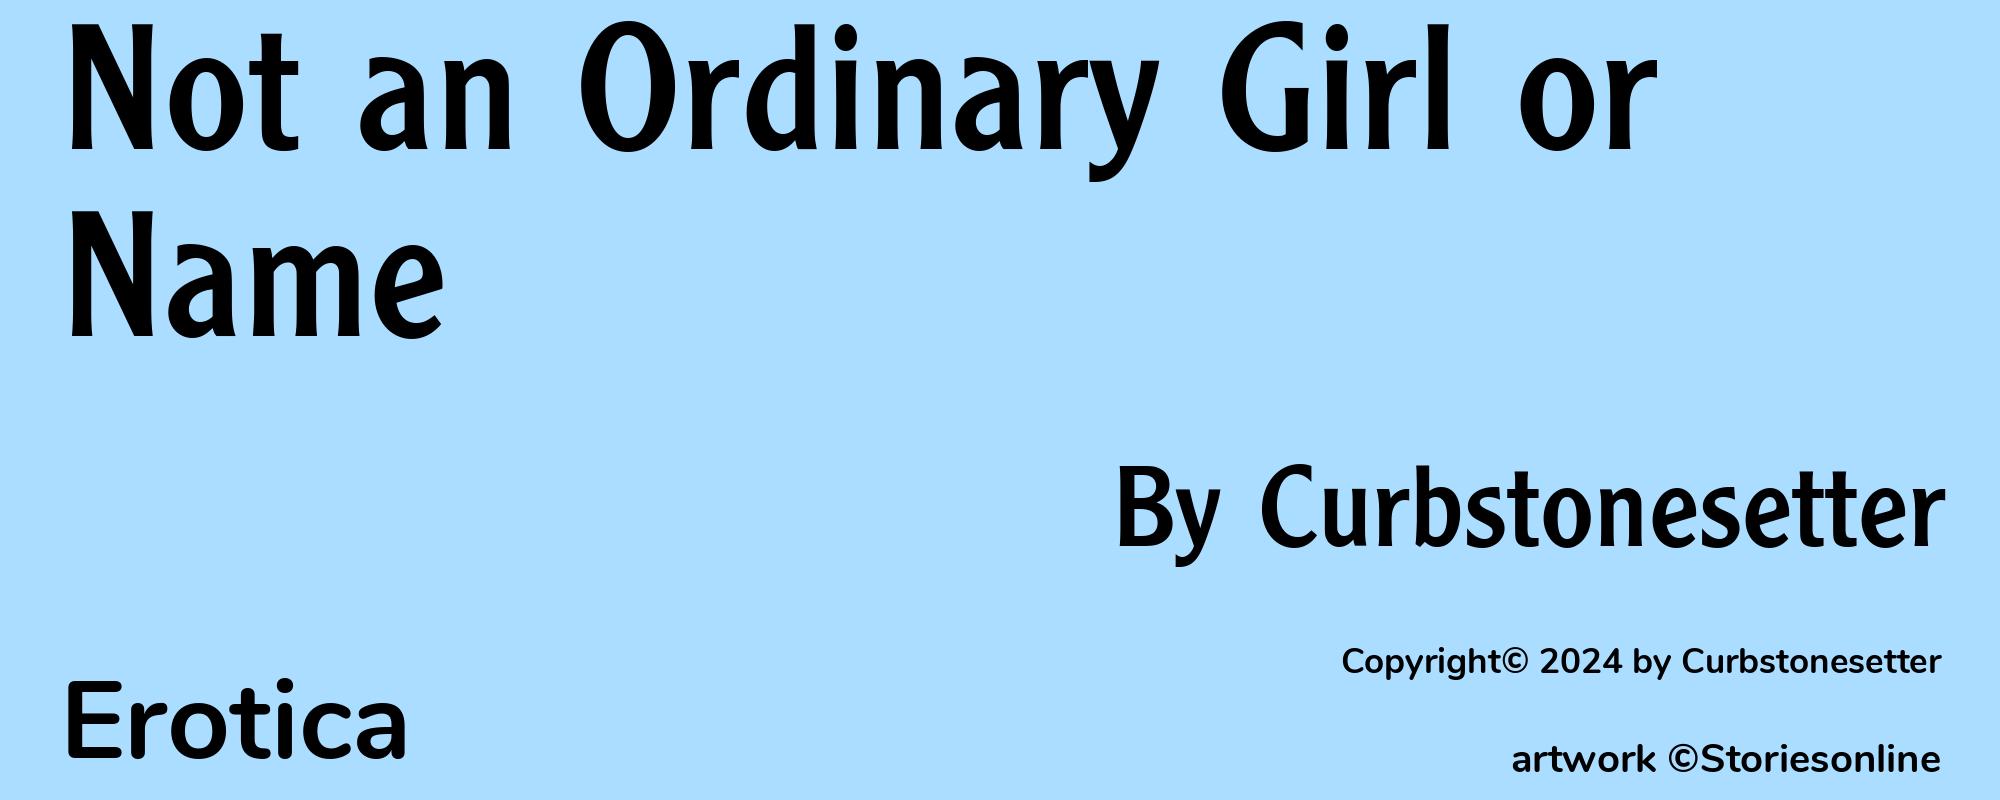 Not an Ordinary Girl or Name - Cover